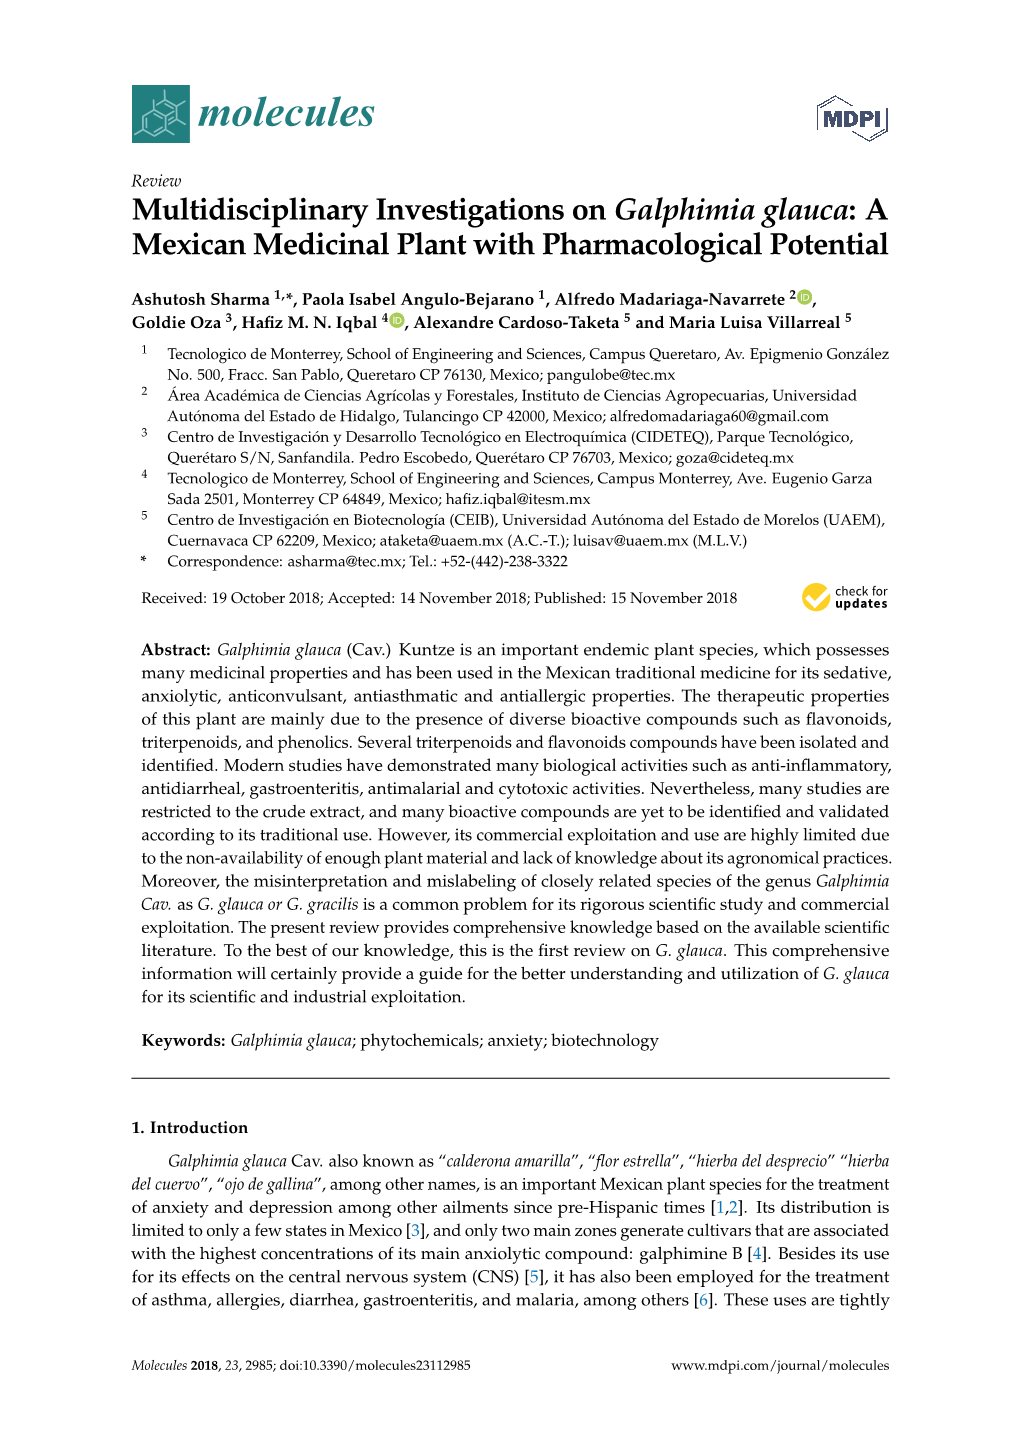 A Mexican Medicinal Plant with Pharmacological Potential